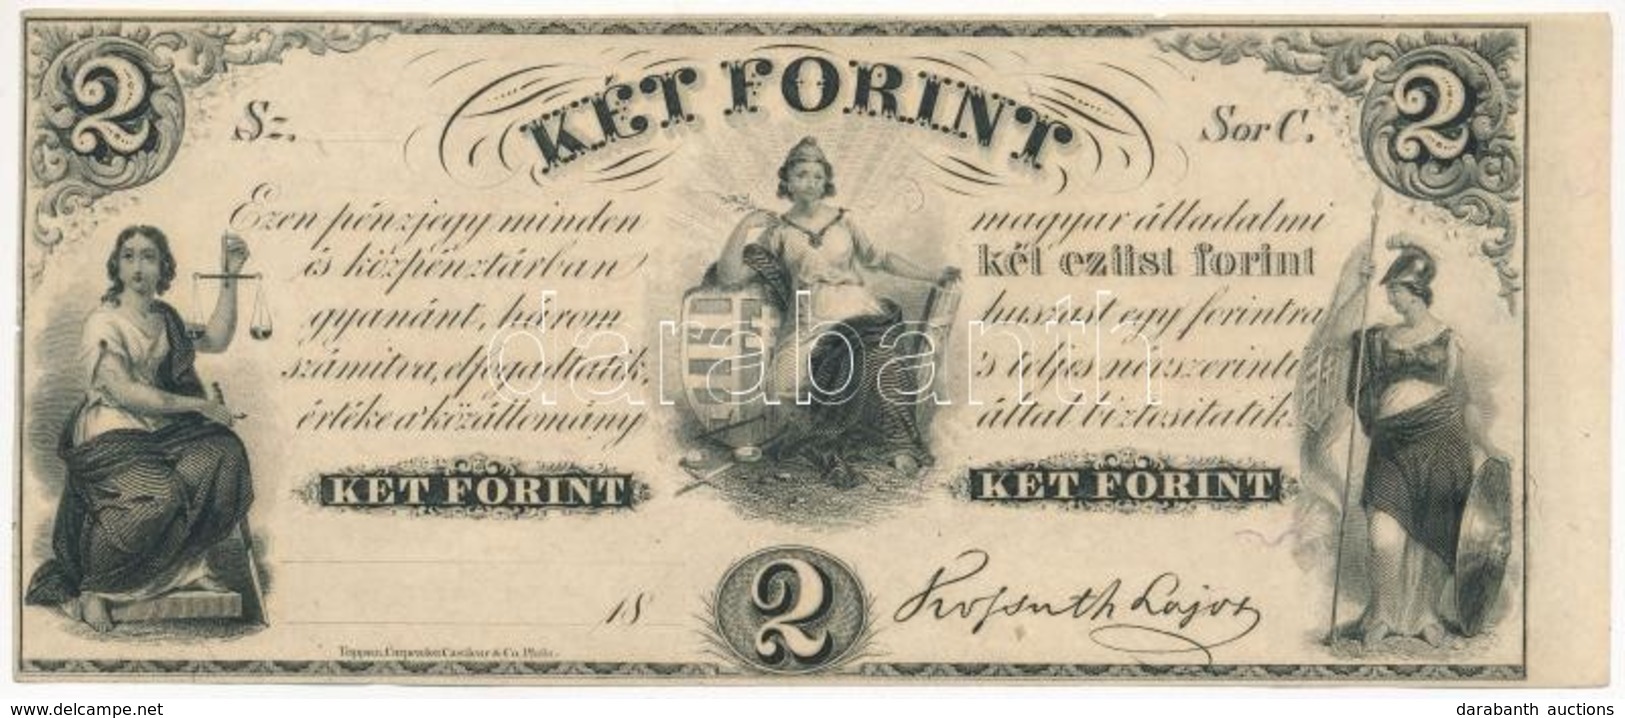 1852. 2Ft 'Kossuth Bankó' 'C' Kitöltetlen T:I- Foltos Hungary 1852. 2 Forint 'C' Without Date And Serial Number C:AU Sta - Unclassified